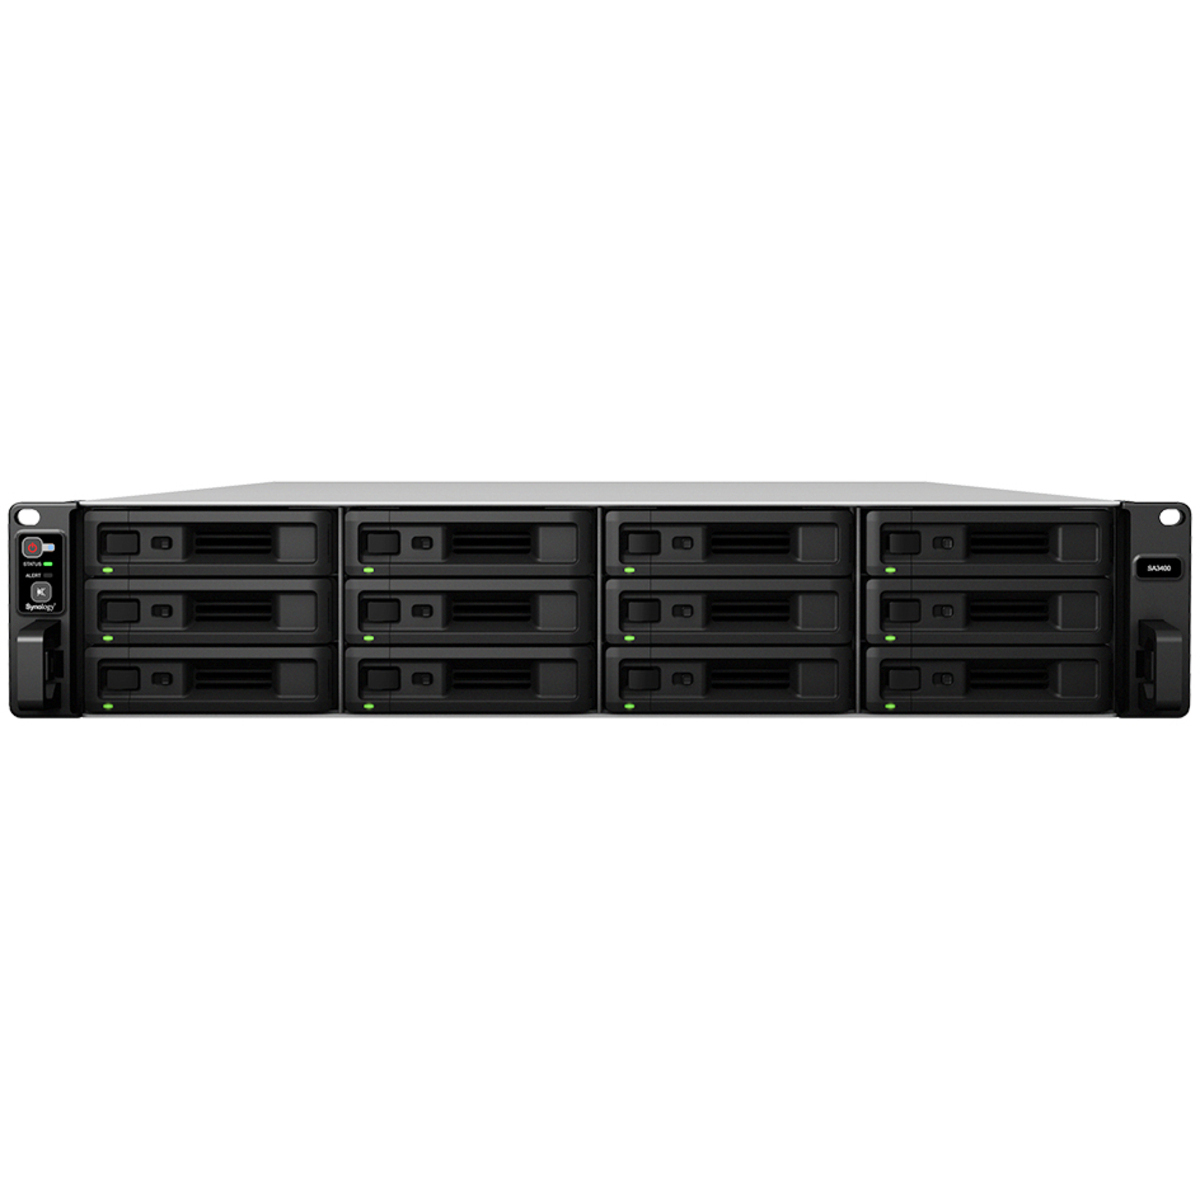 buy $10736 Synology RackStation SA3400 24tb RackMount NAS - Network Attached Storage Device 12x2000gb Western Digital Red SA500 WDS200T1R0A 2.5 SATA 6Gb/s SSD NAS Class Drives Installed - Burn-In Tested - nas headquarters buy network attached storage server device das new raid-5 free shipping usa RackStation SA3400